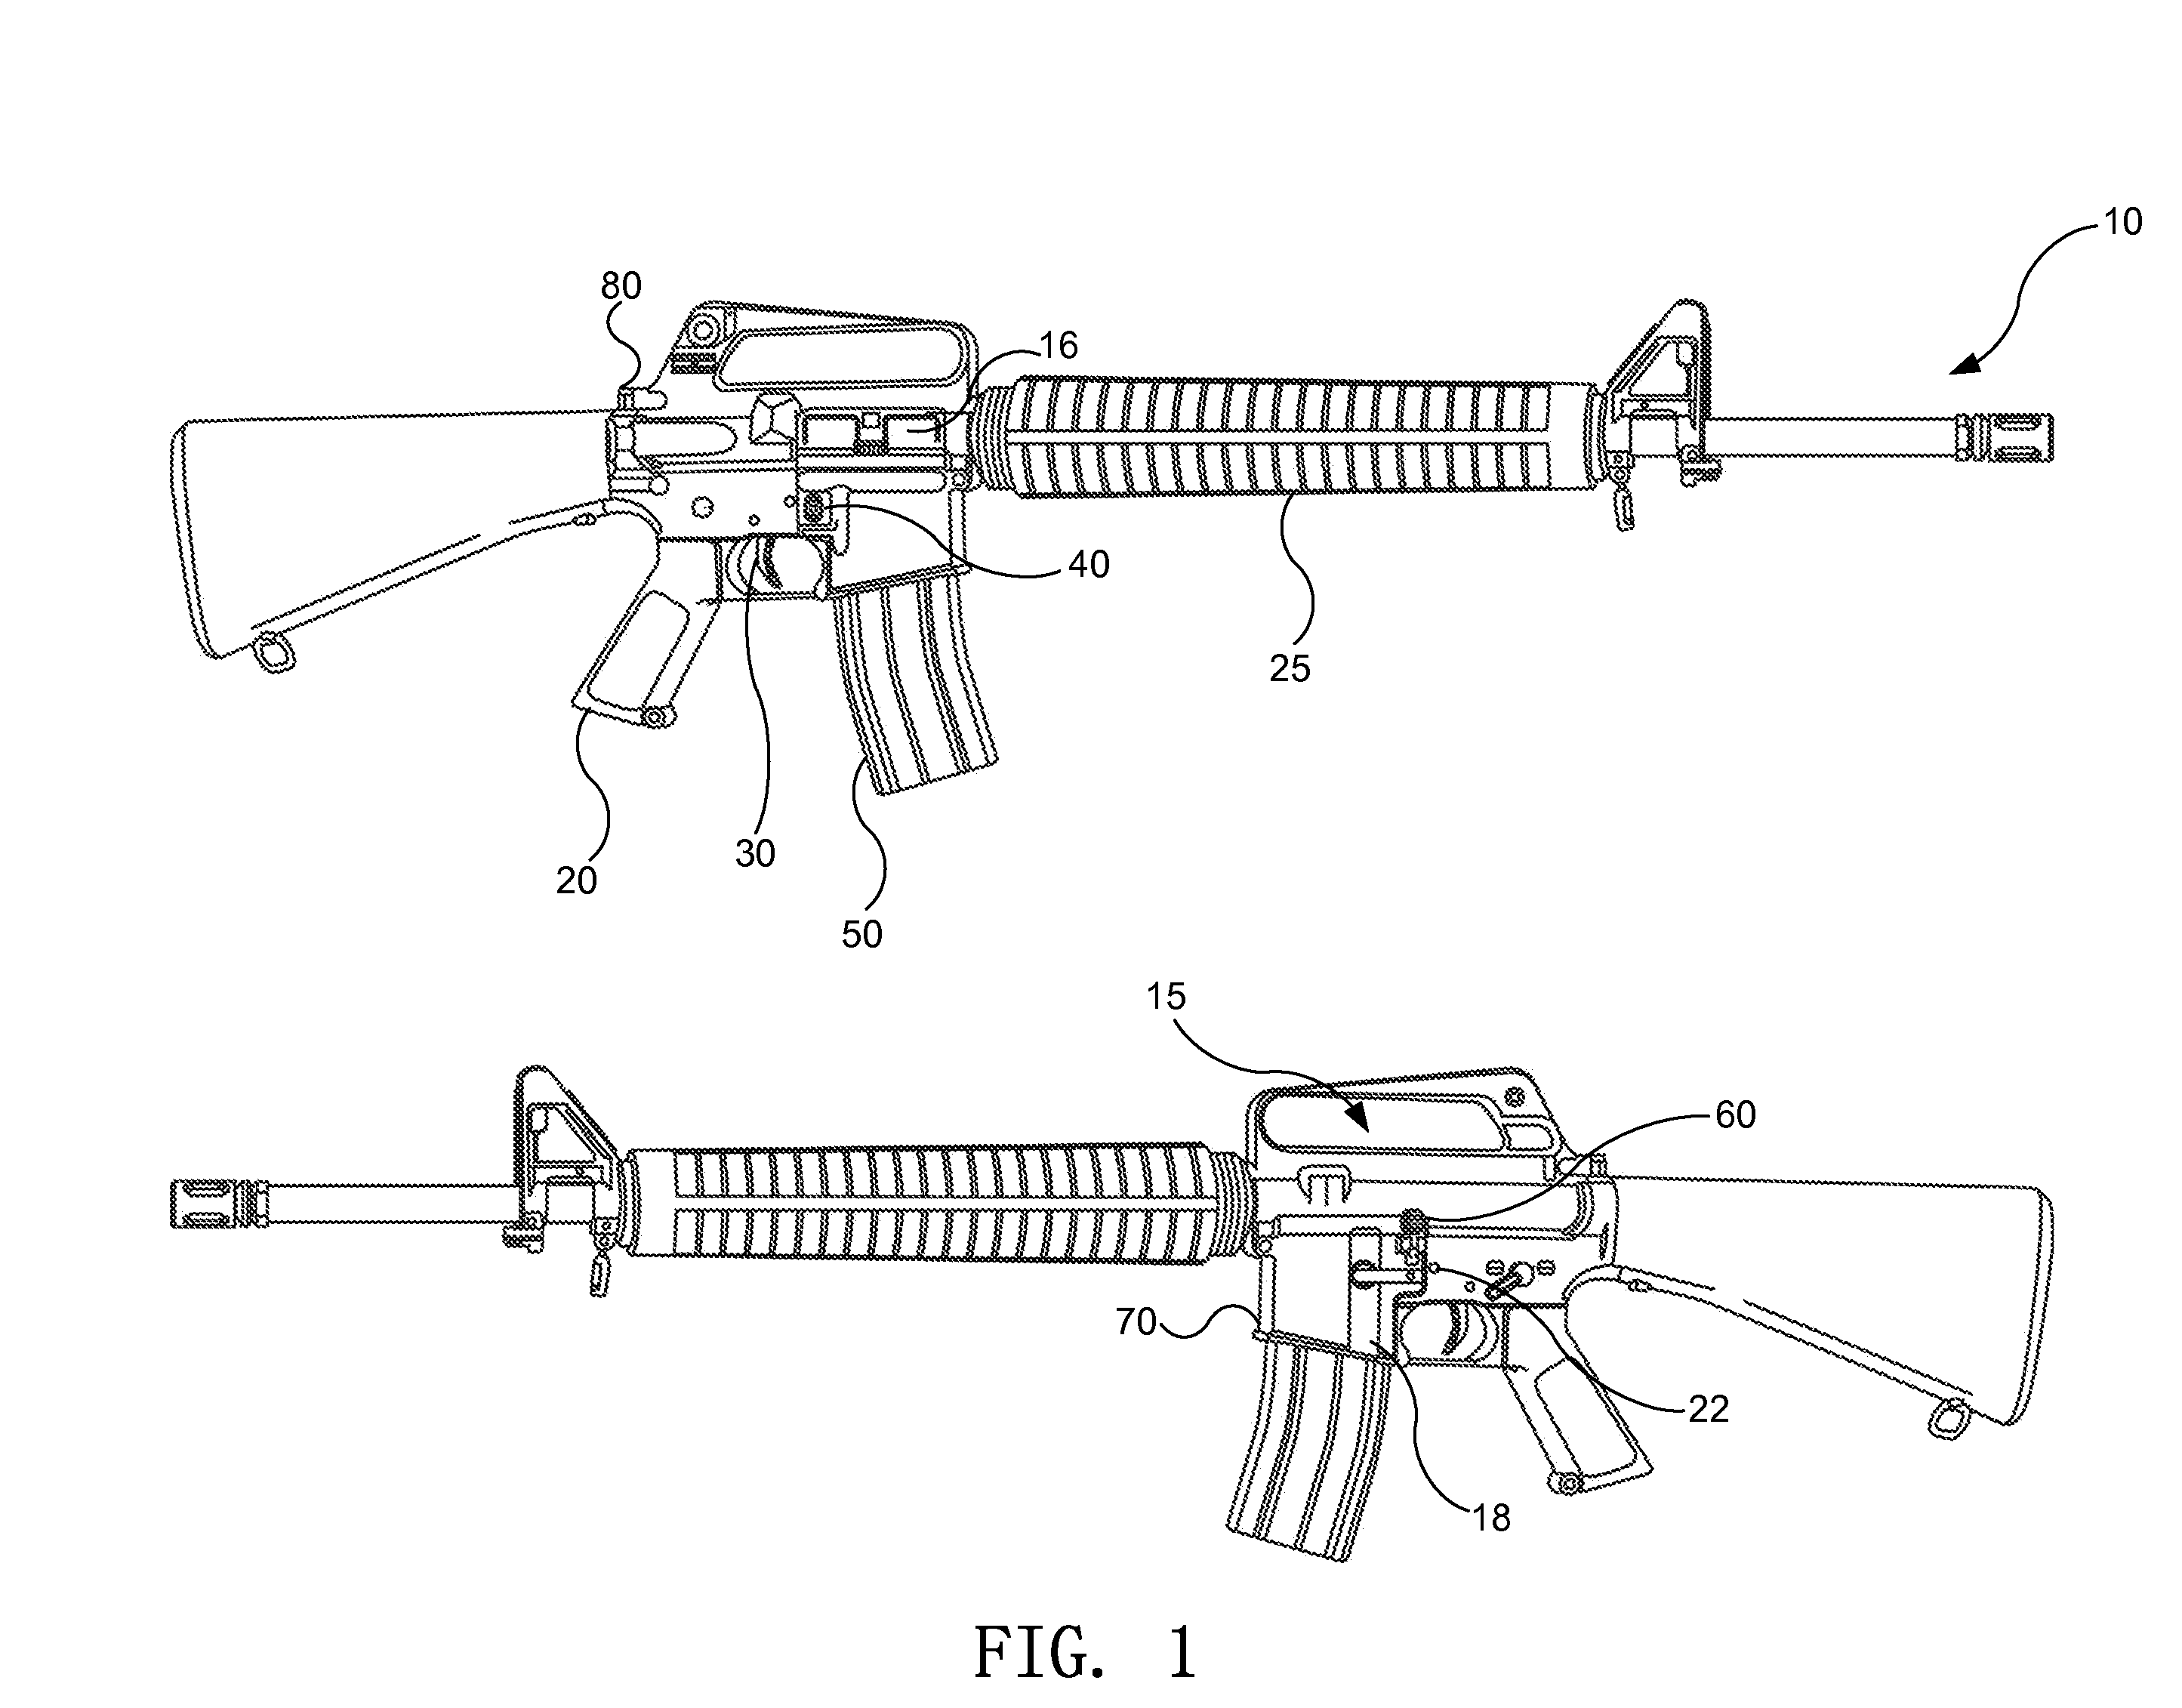 Firearm receiver with ambidextrous functionality